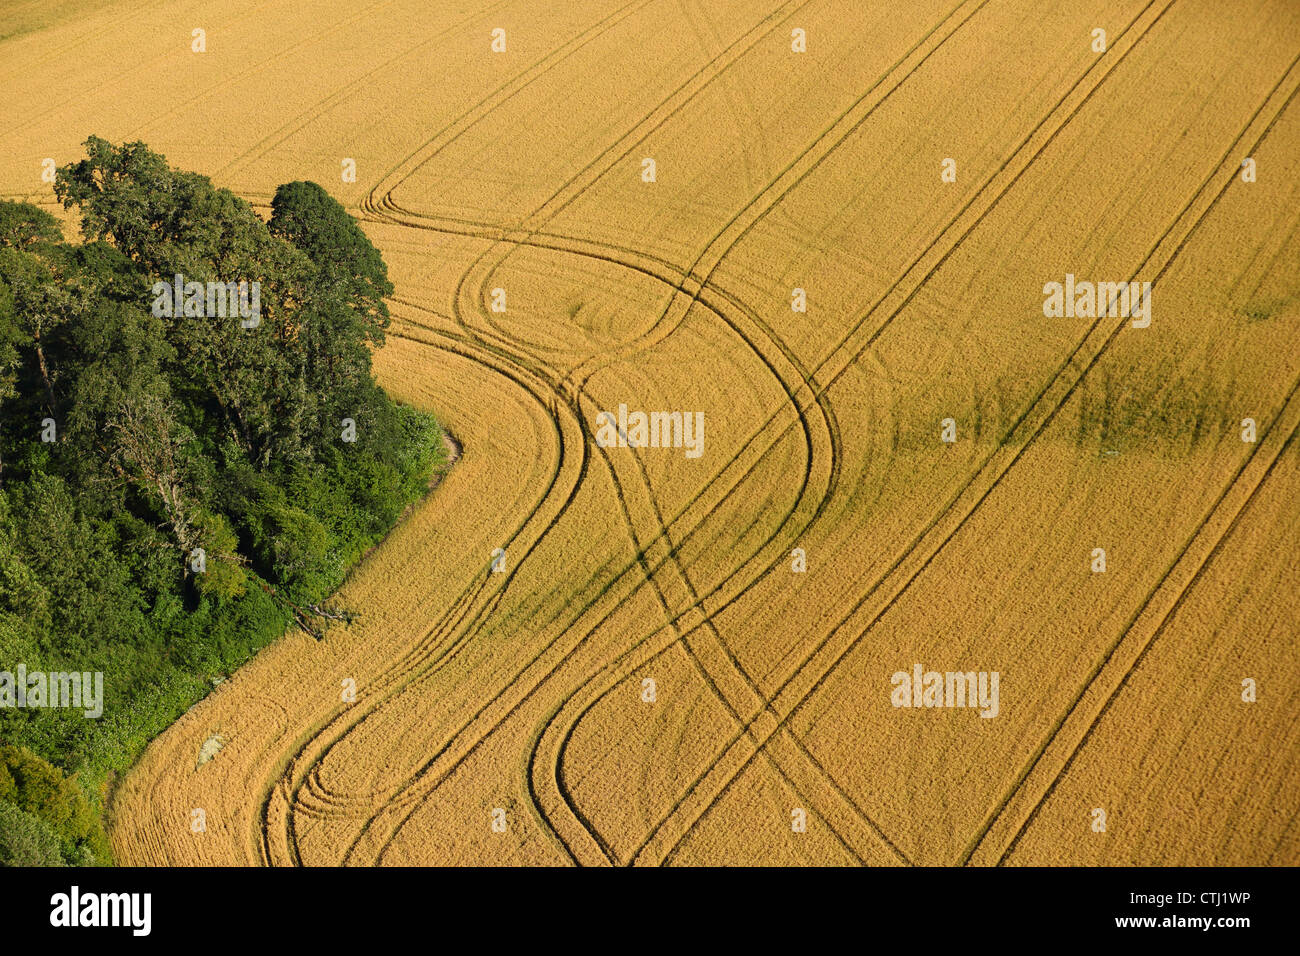 Aerial view of wheat field with patterns Stock Photo